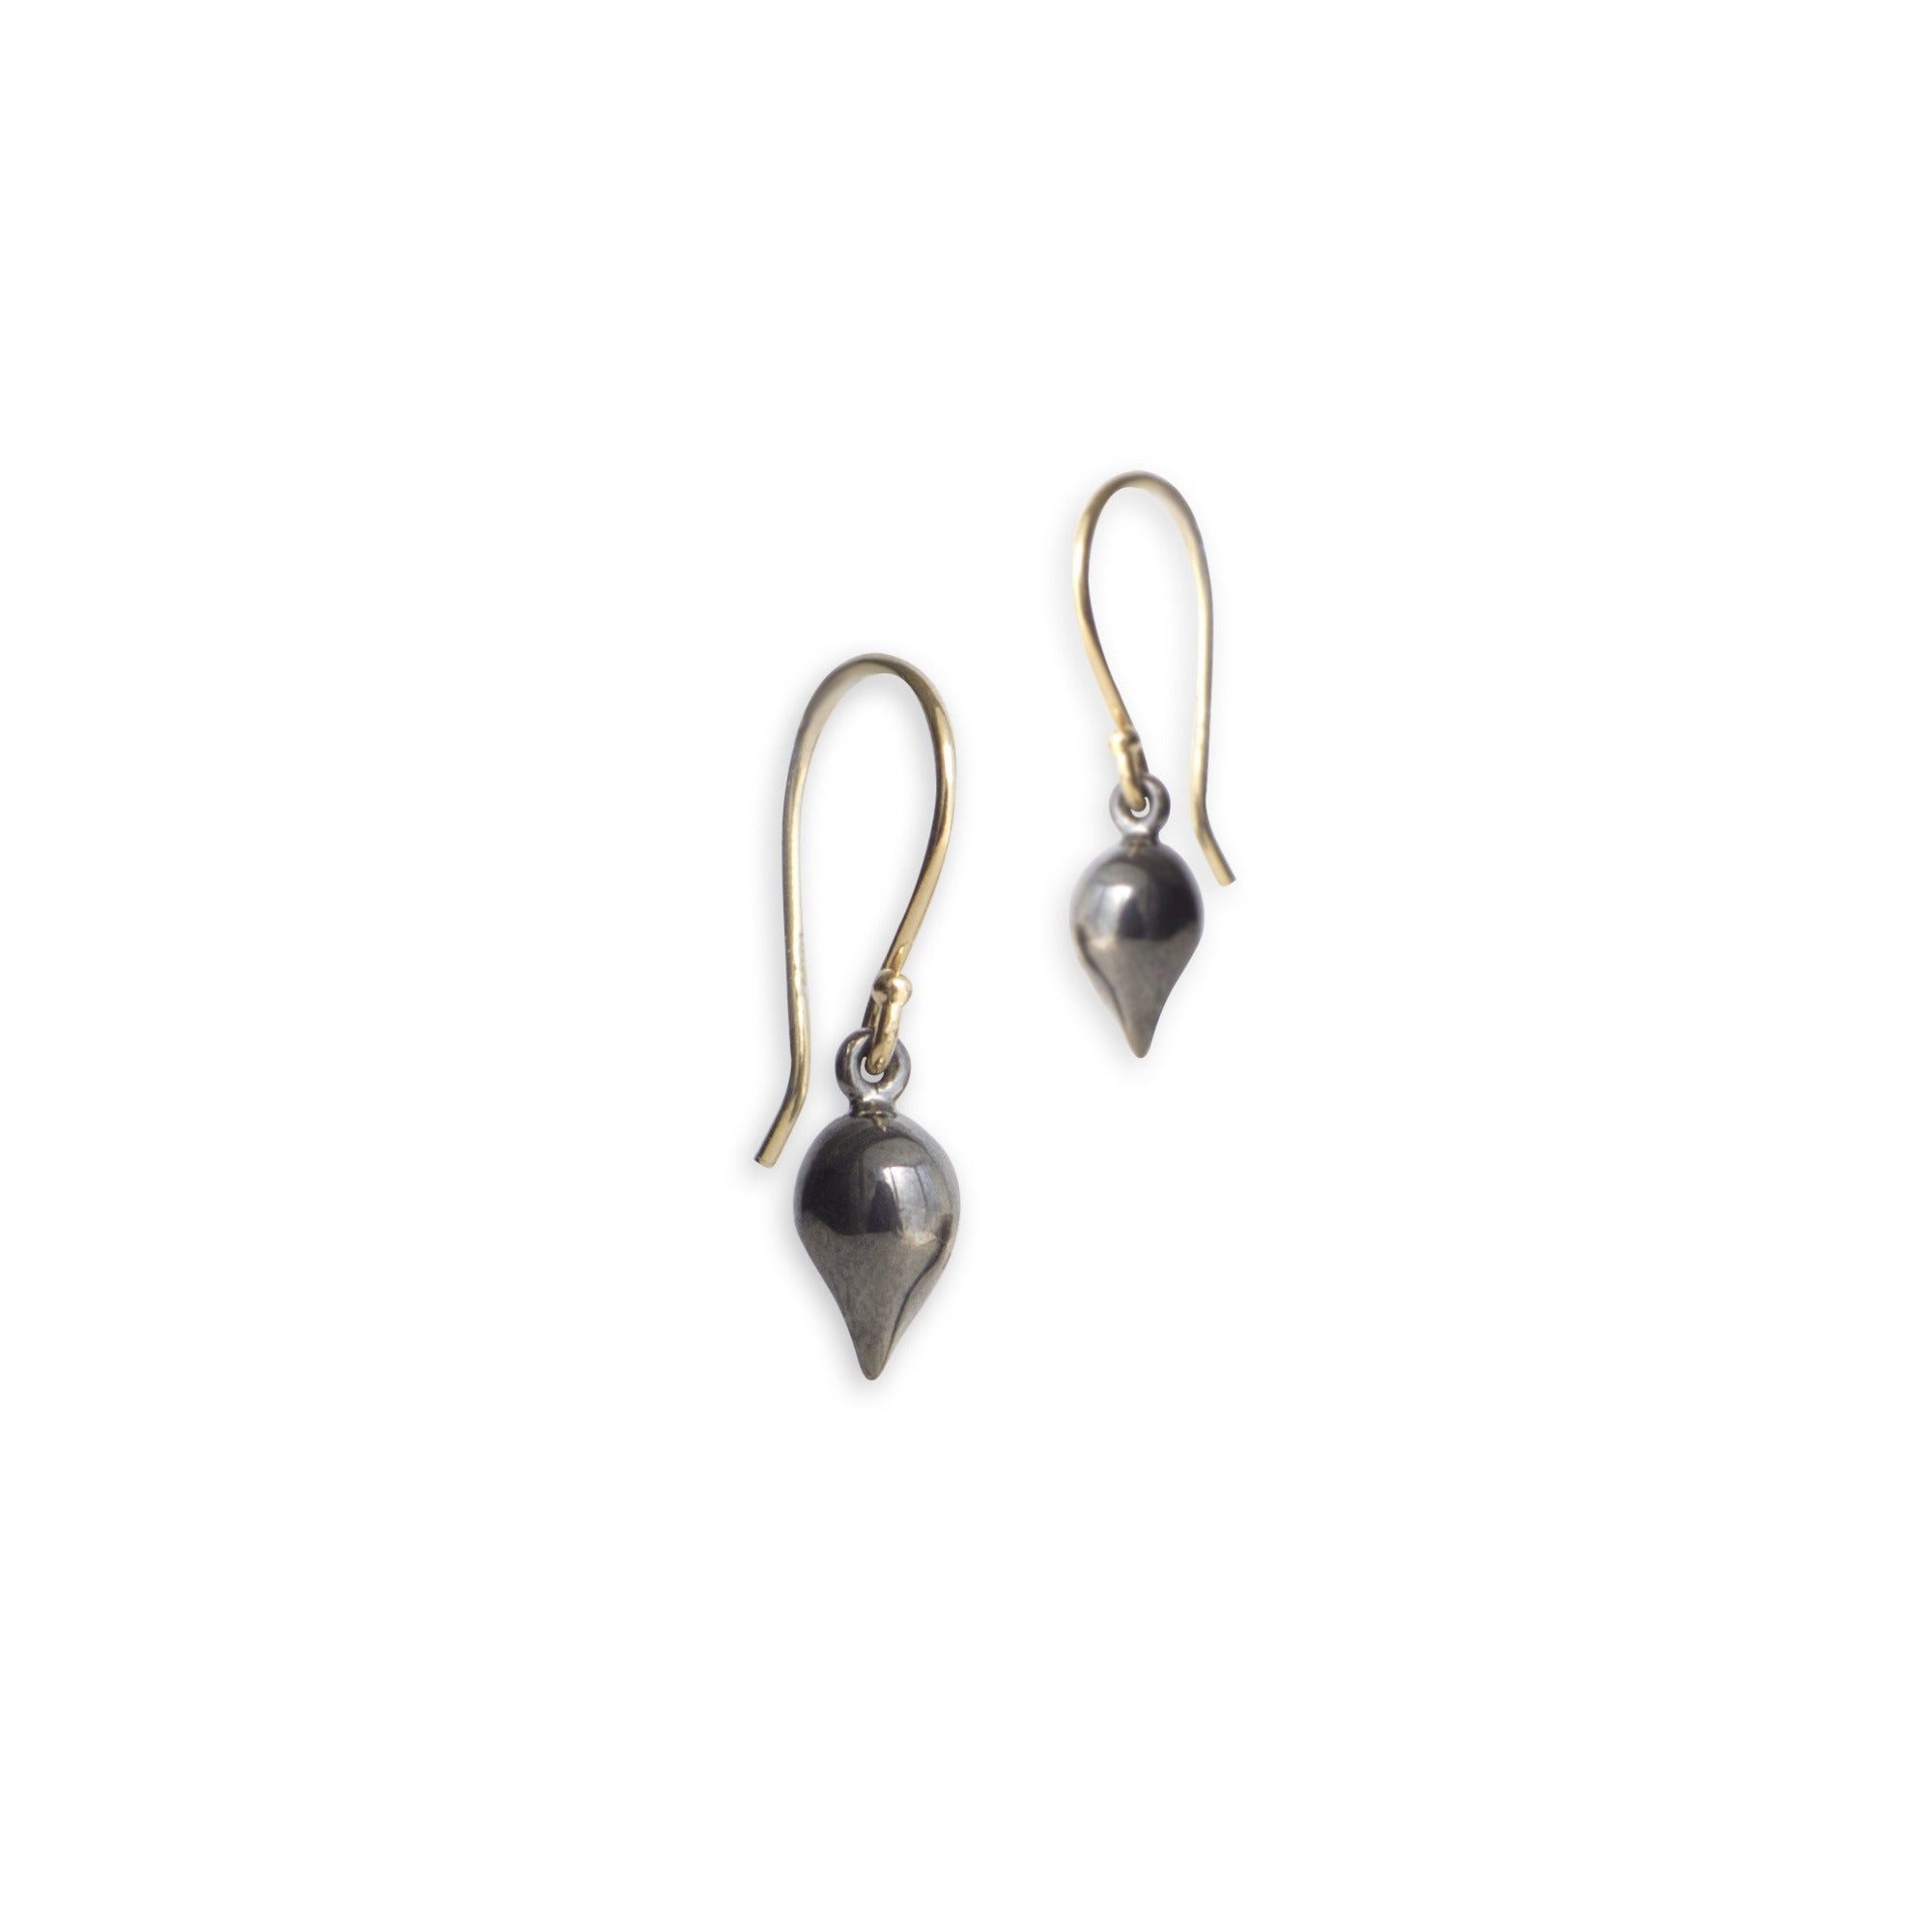 sterling silver plated in black rhodium with 14k yellow gold ear wires small pod dangle earrings